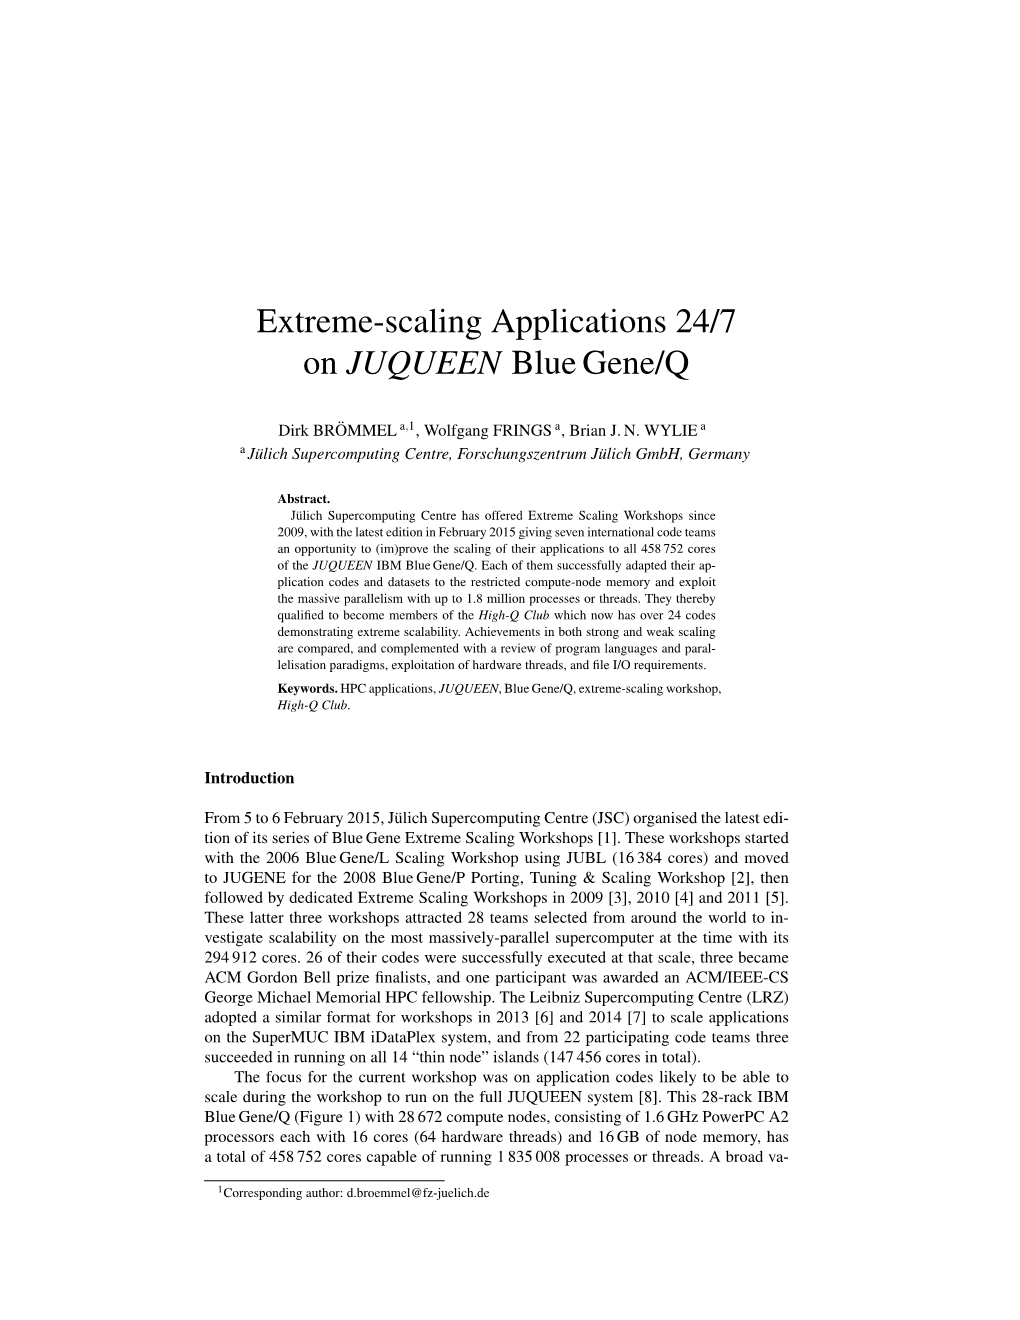 Extreme-Scaling Applications 24/7 on JUQUEEN Blue Gene/Q